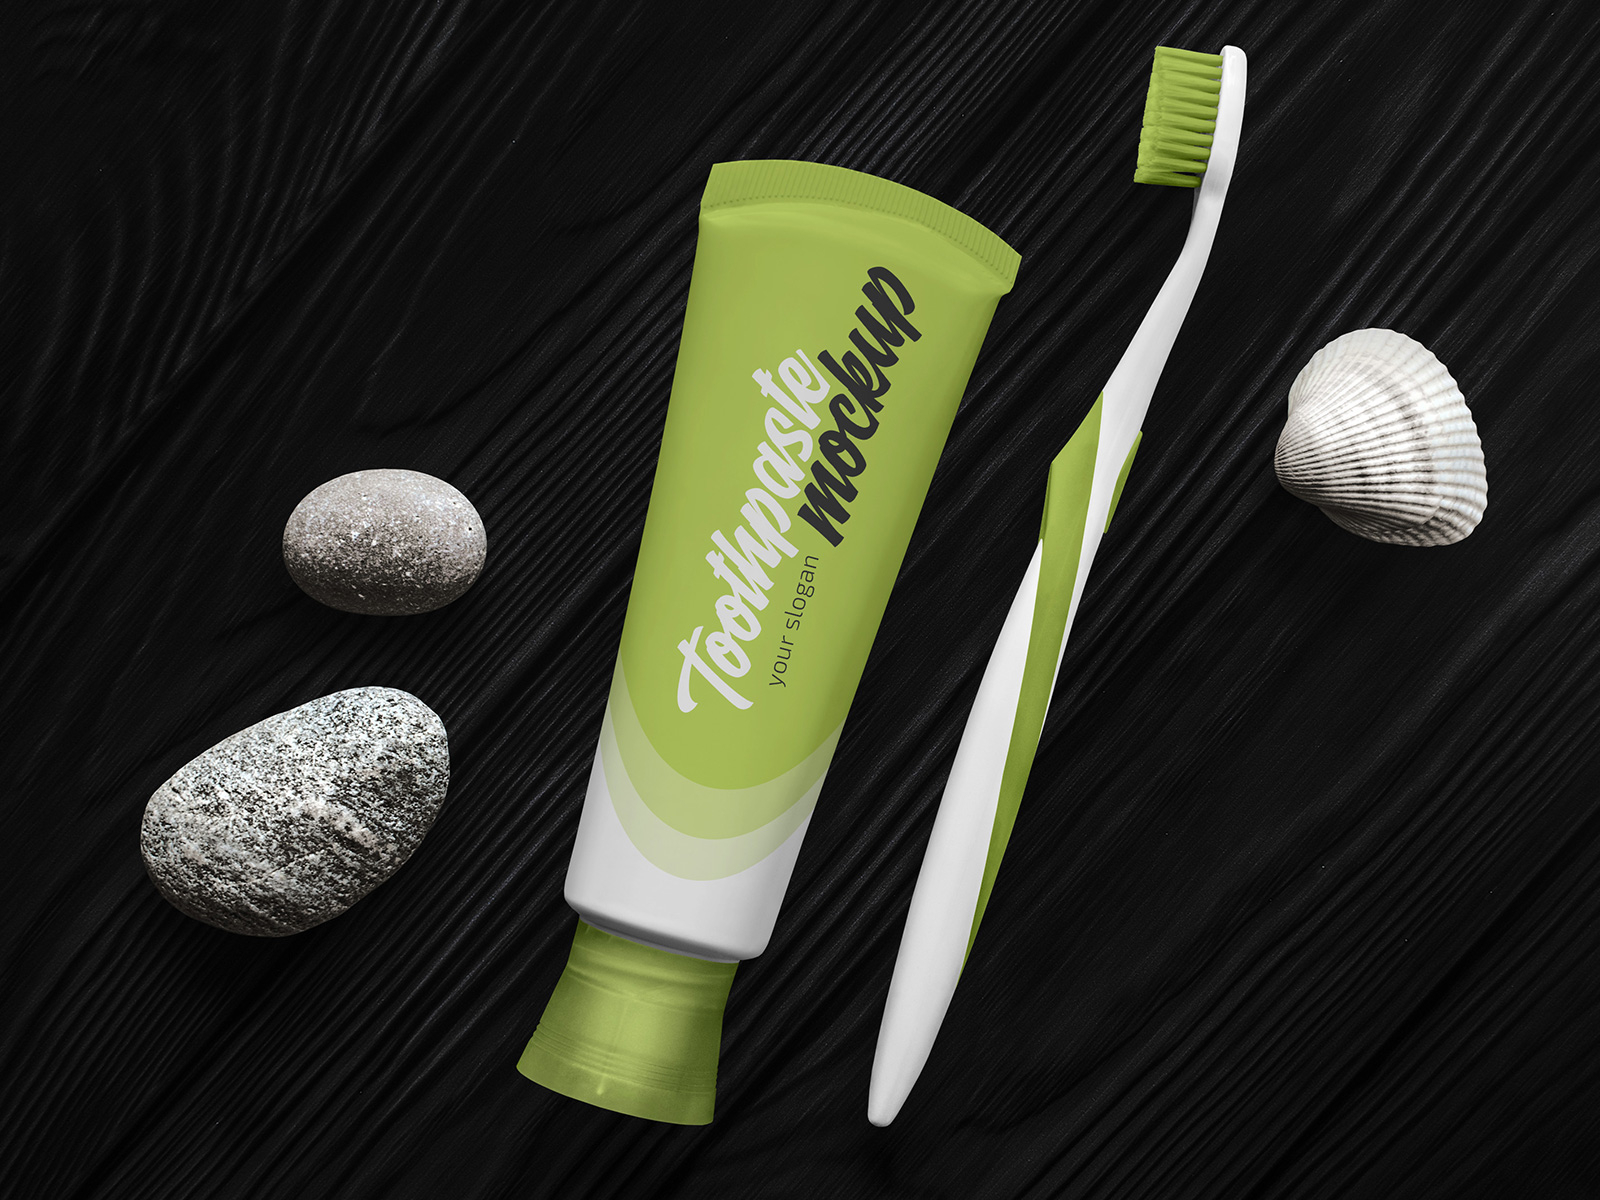 Download Free Toothpaste with Toothbrush Mockup by Country4k on Dribbble